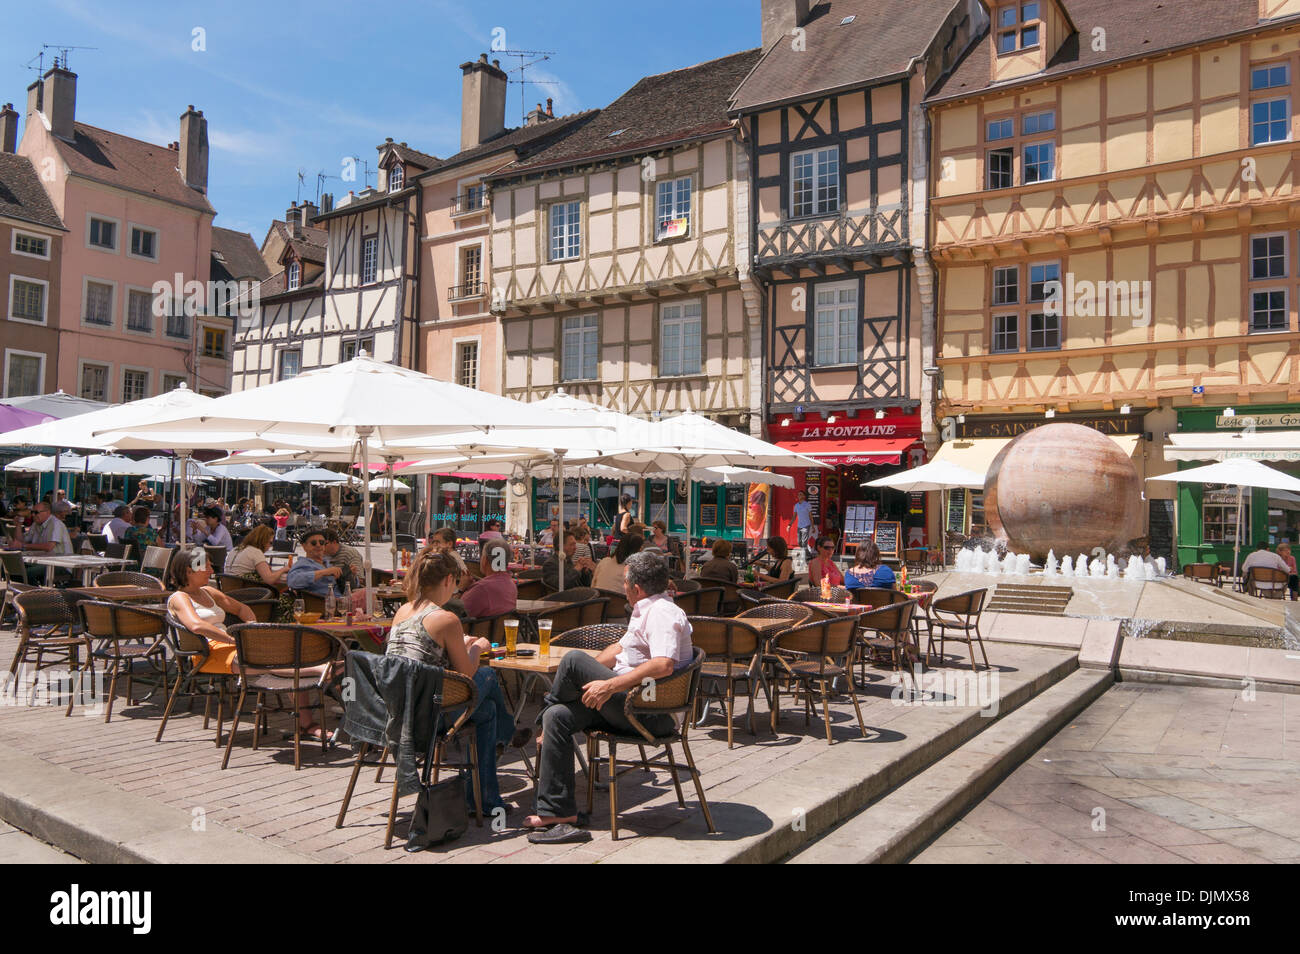 People eating at outdoor restaurants Place St Vincent Chalon sur Saone Burgundy, Eastern France Stock Photo